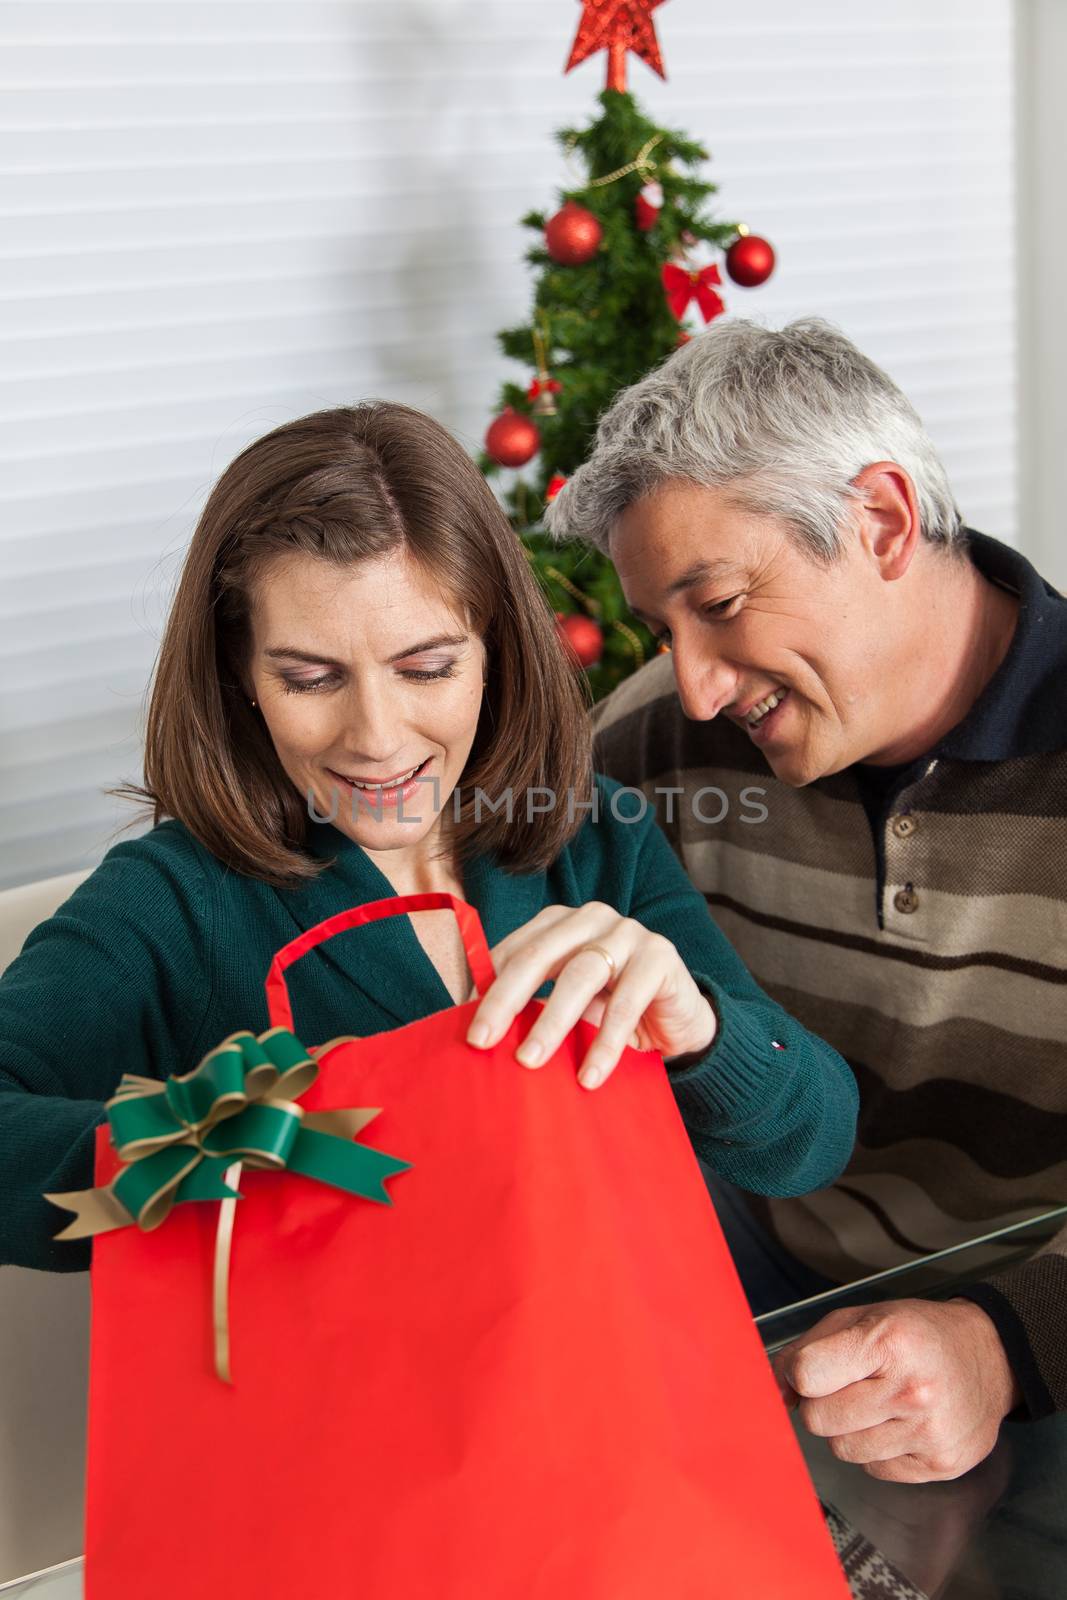 35-40, bag, caucasian, celebrating, celebration, cheerful, christmas, cute, ethnicity, female, festive, festivity, gift, giving, green, hand, happy, holding, joyful, love, male, man, merry, model, old, open, opening, person, present, pretty, property, red, release, smile, smiling, two, vertical, white, years, attractive